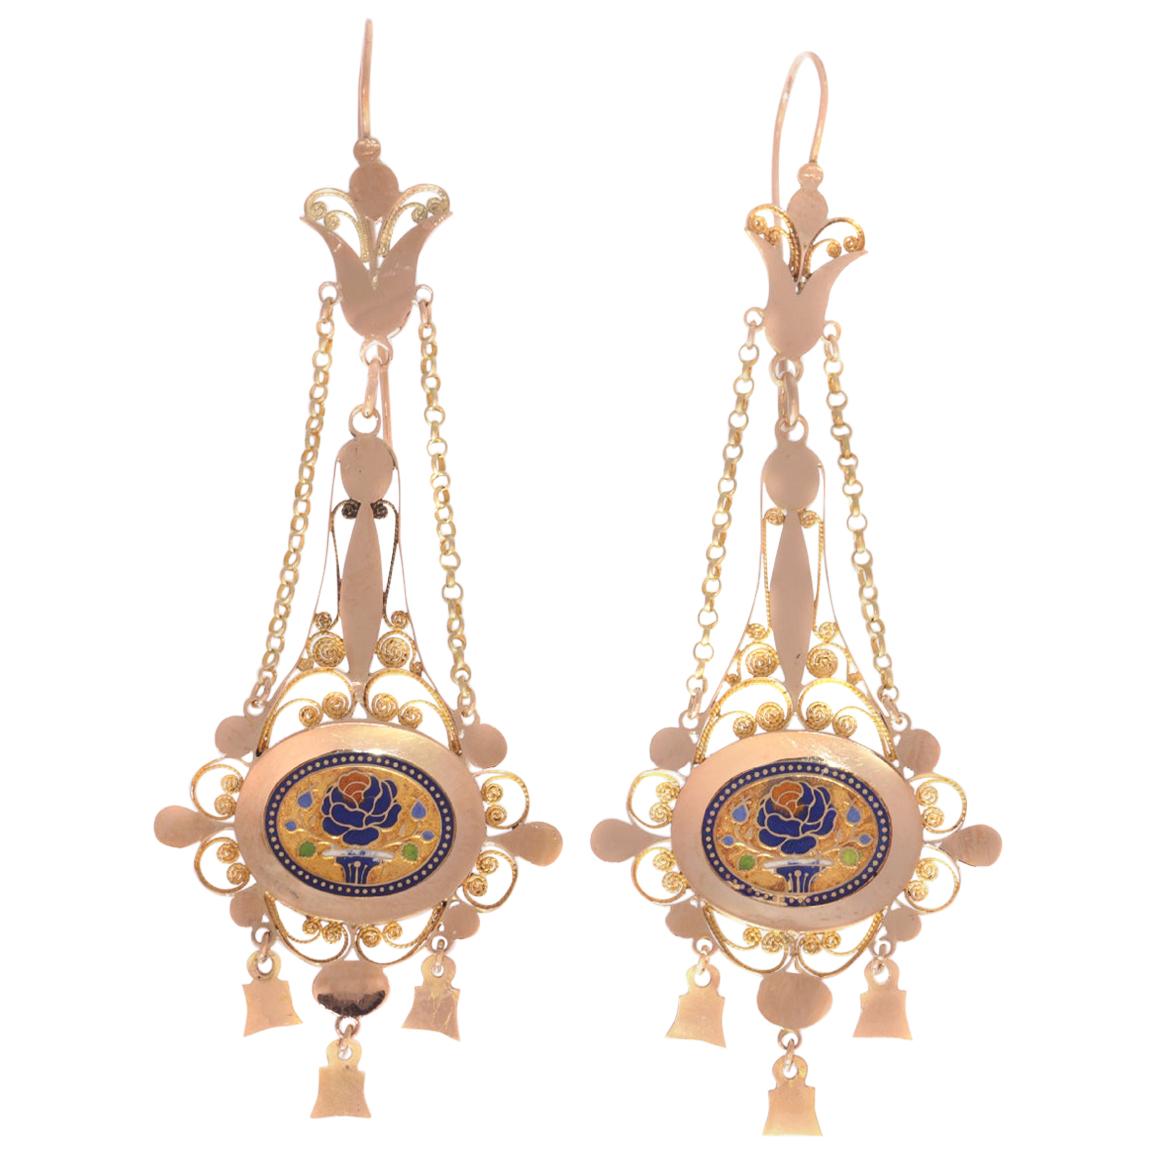 Antique Gold Pendent Earrings with Filigree and Enamel, Early 19th Century